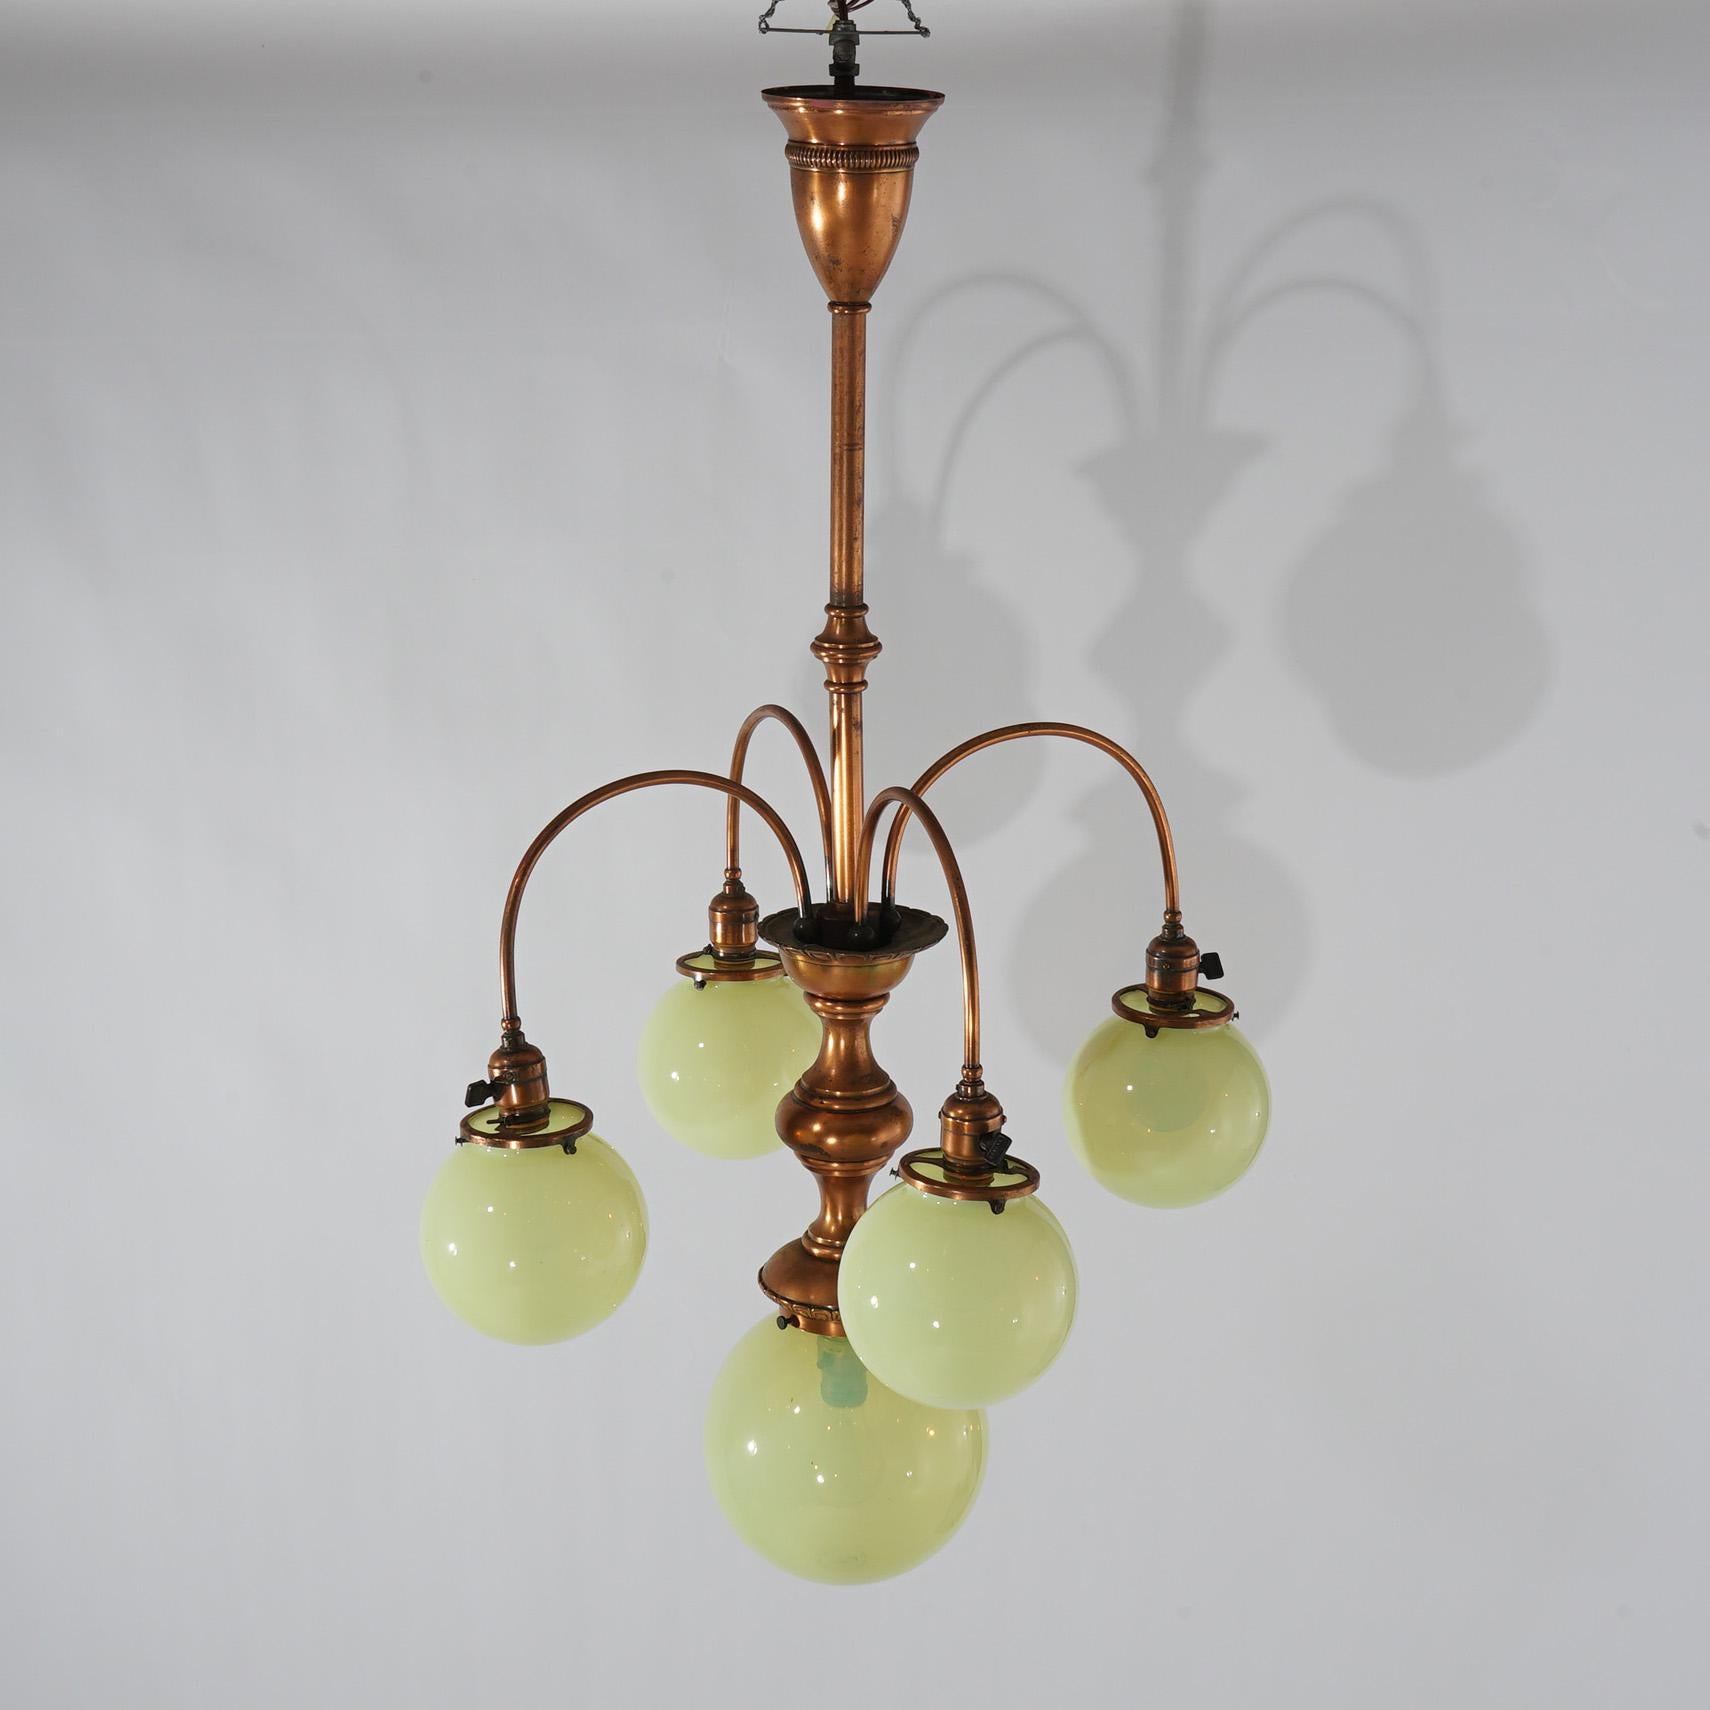 American Antique Arts & Crafts Copper with Brass Five Light Chandelier Fixture c1910 For Sale